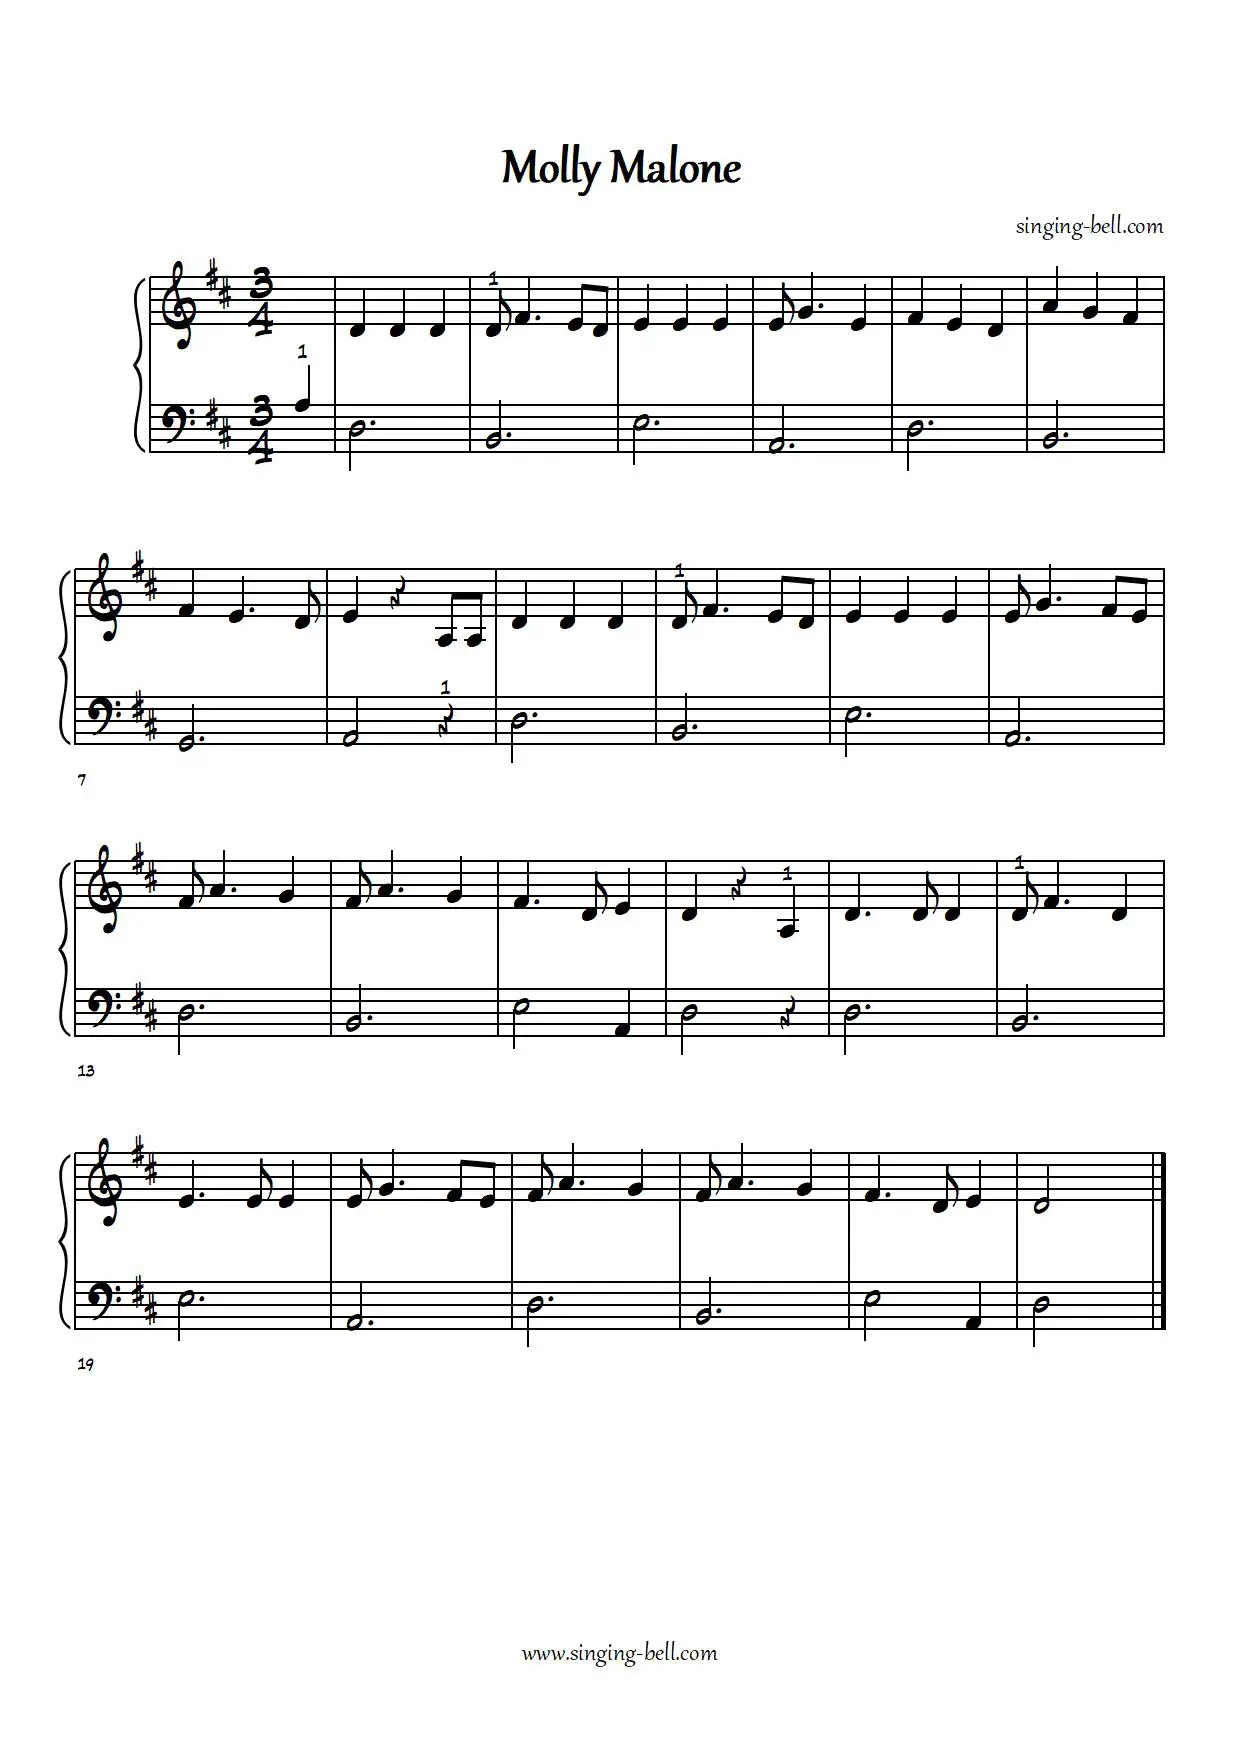 Molly Malone easy piano sheet music notes chords beginners pdf